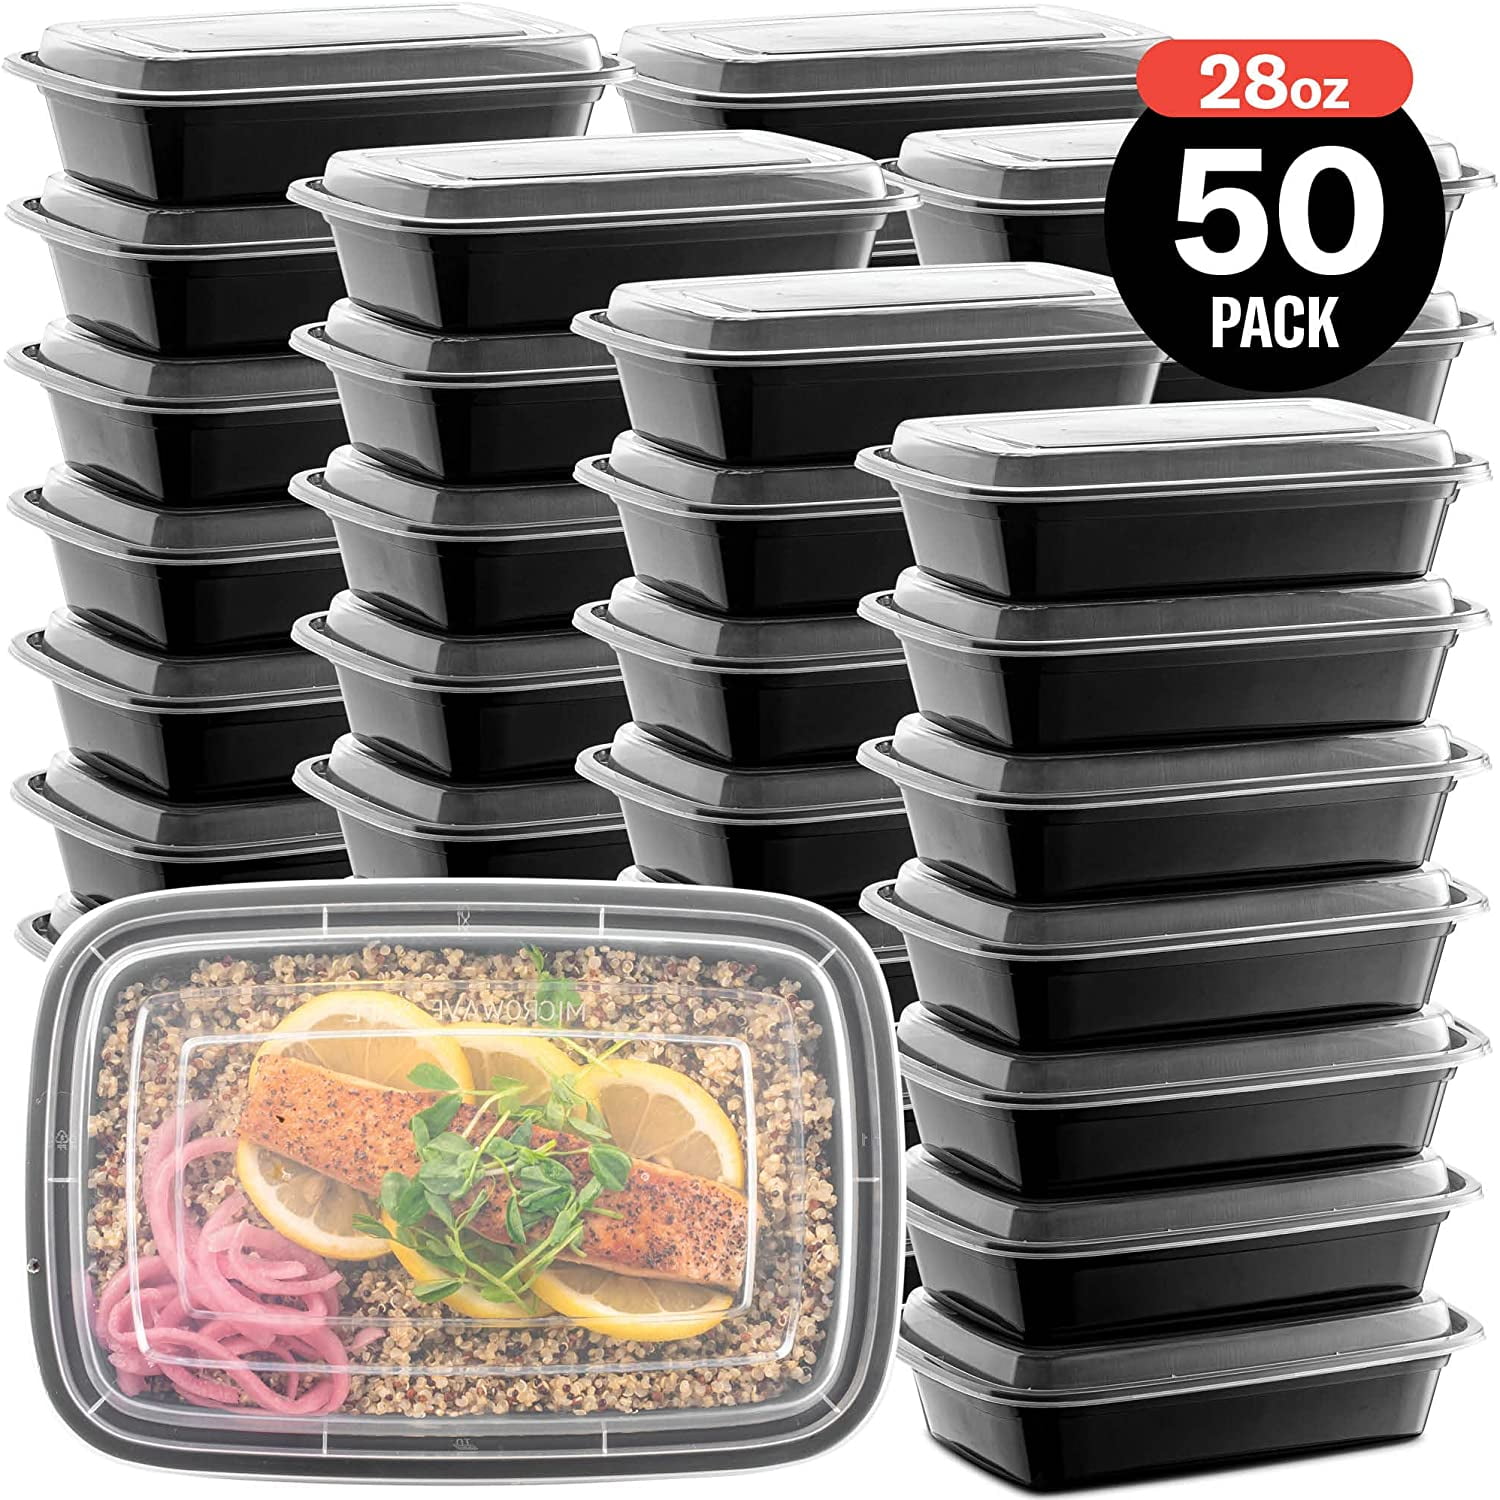 100 Meal Prep Container Plastic Food Storage Reusable Microwavable